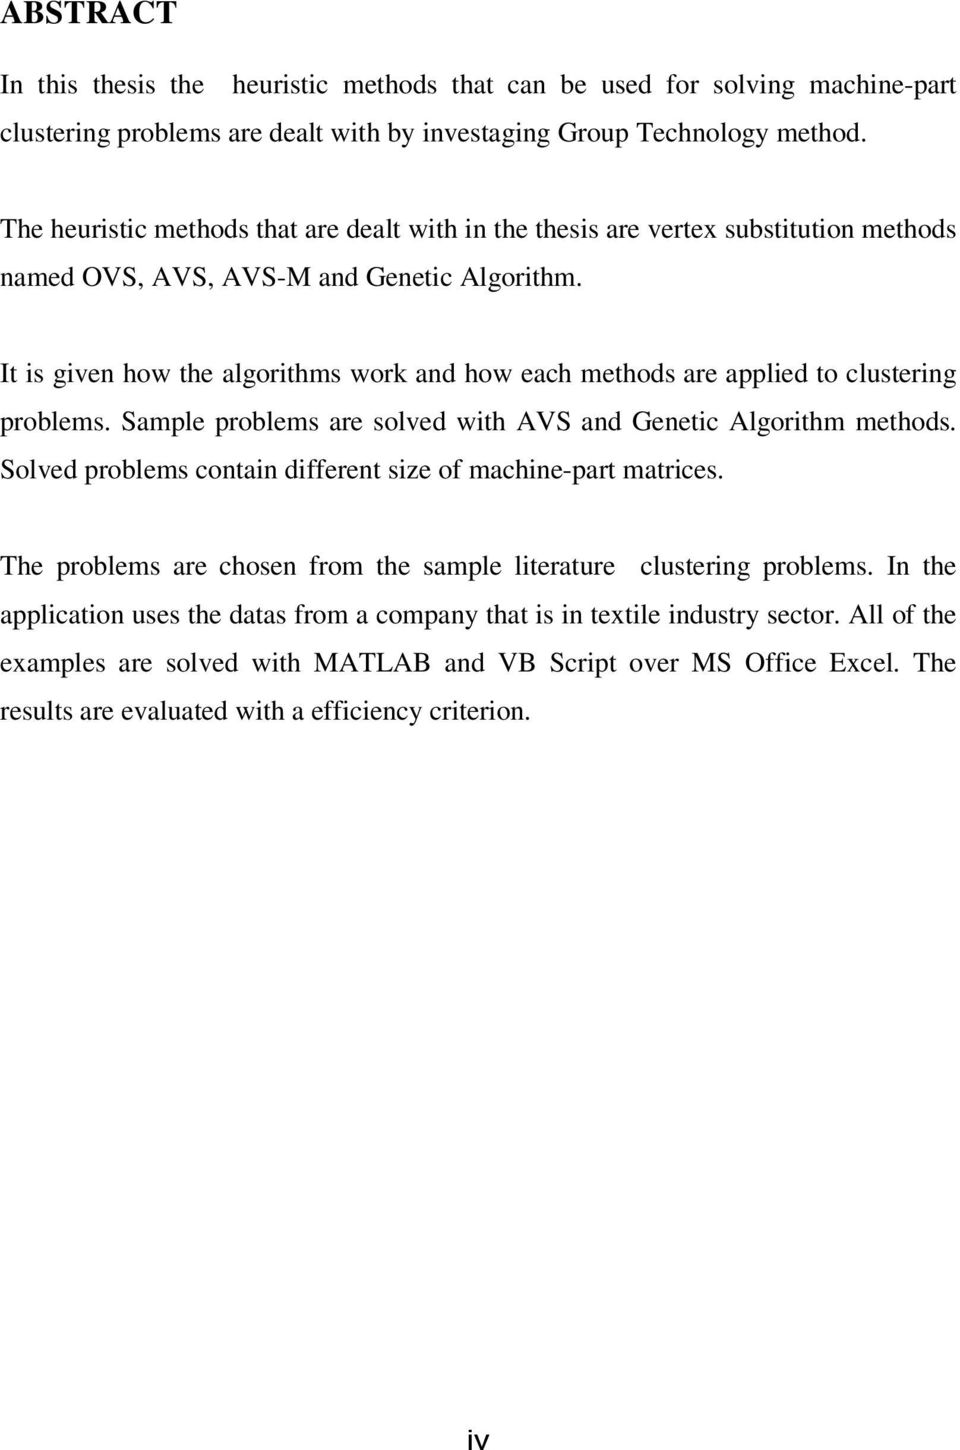 It is given how the algorithms work and how each methods are applied to clustering problems. Sample problems are solved with AVS and Genetic Algorithm methods.